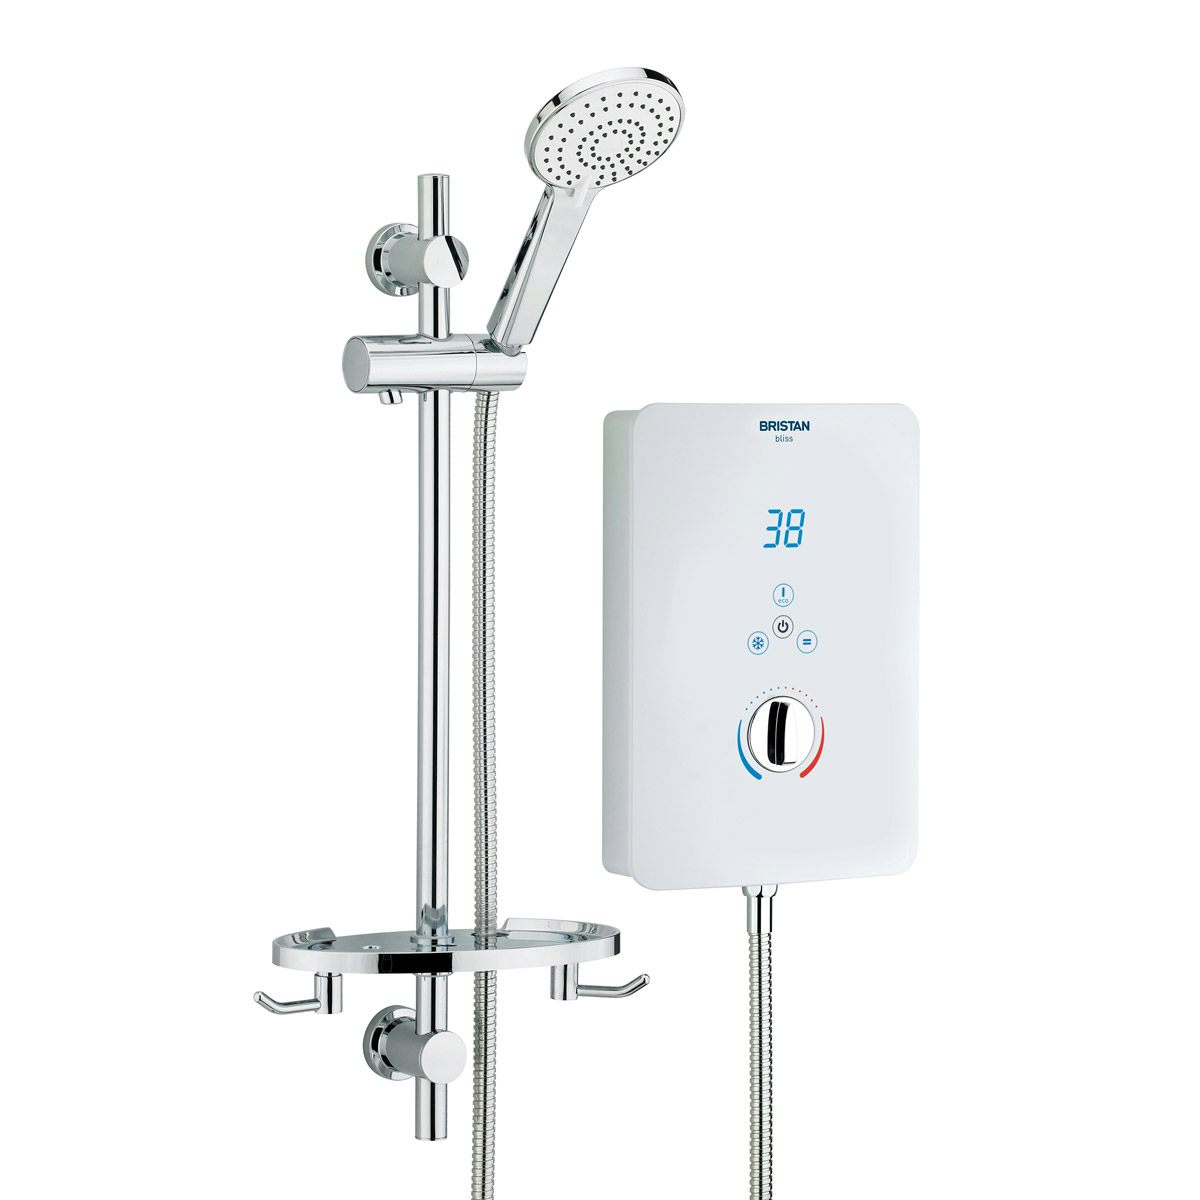 Bristan Bliss 9.5kw electric shower white